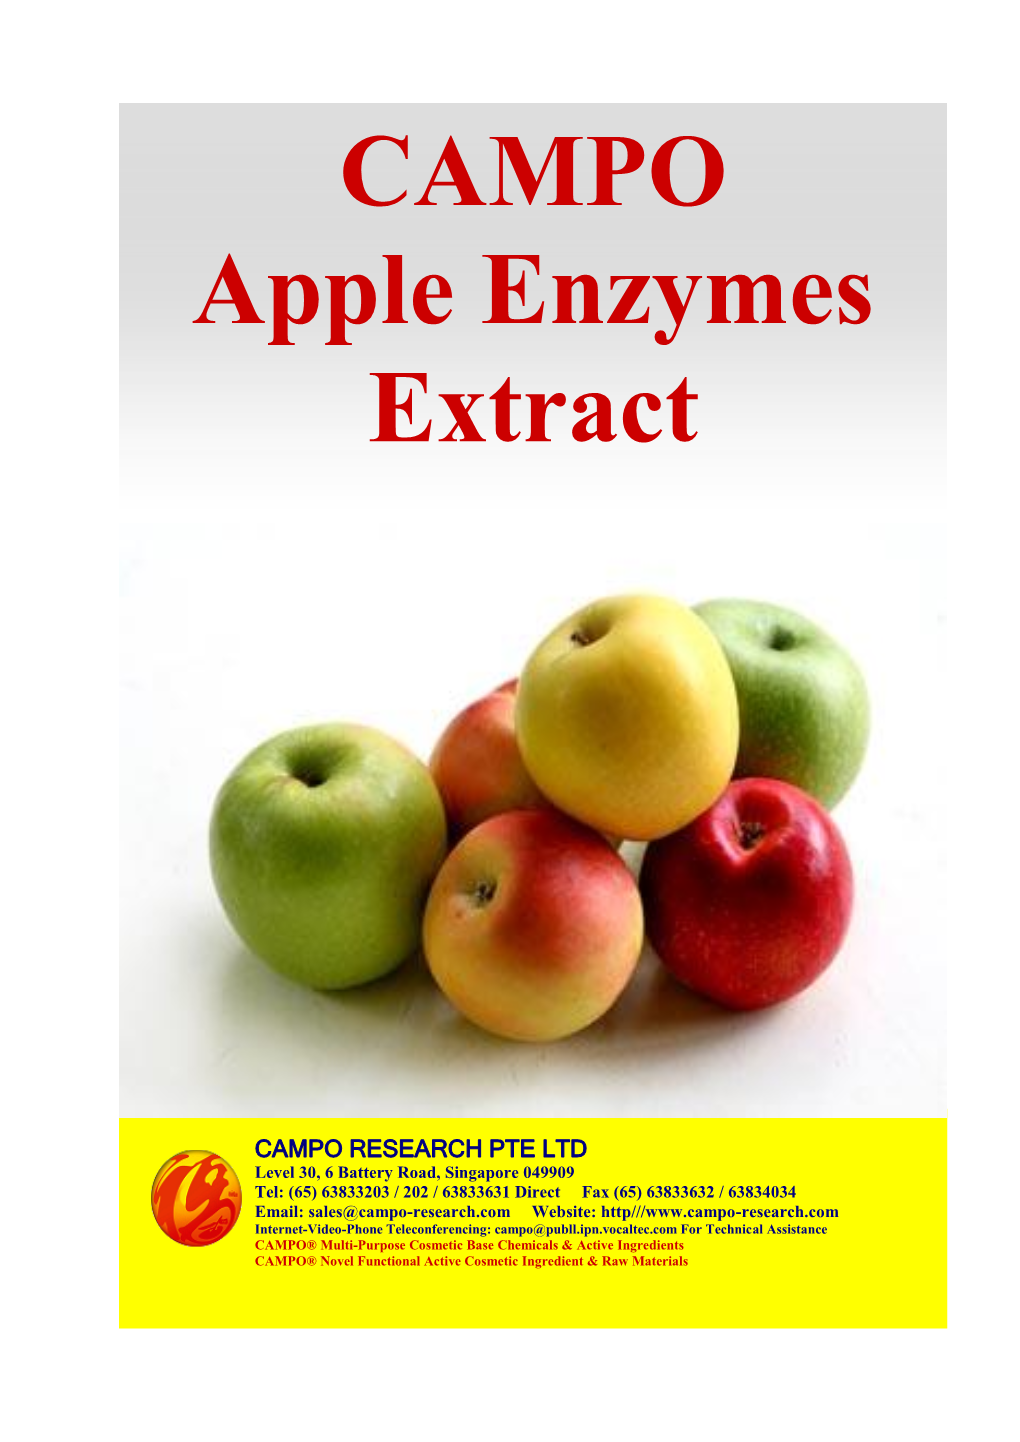 CAMPO Apple Enzymes Extract